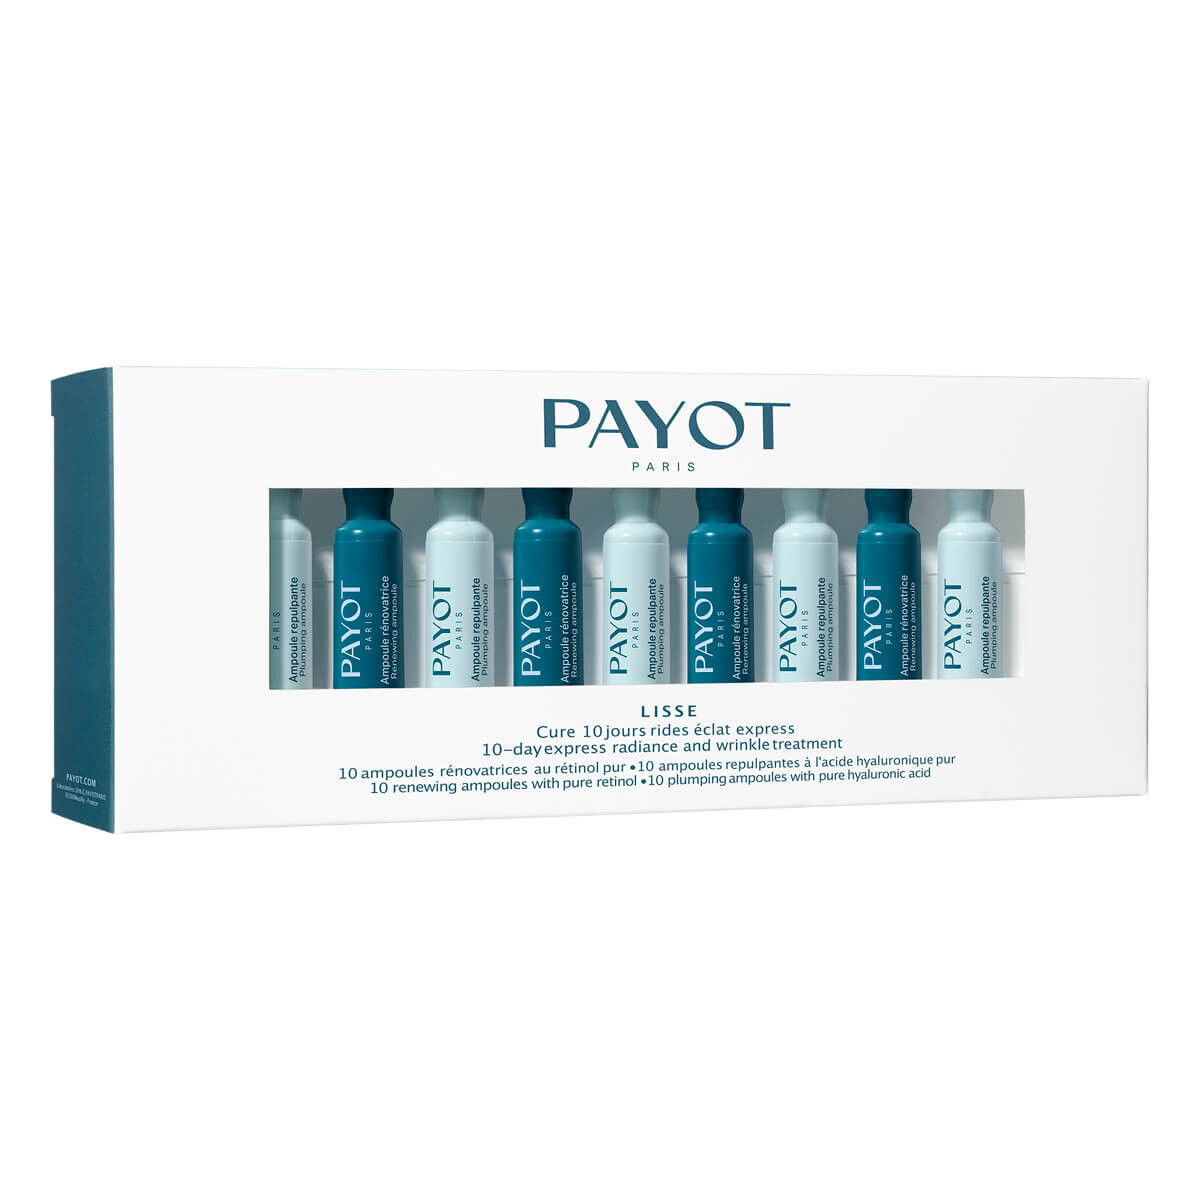 Se Payot 10-day Express Radiance and Wrinkle Treatment, Lisse, 20 x 1 ml. hos Proshave